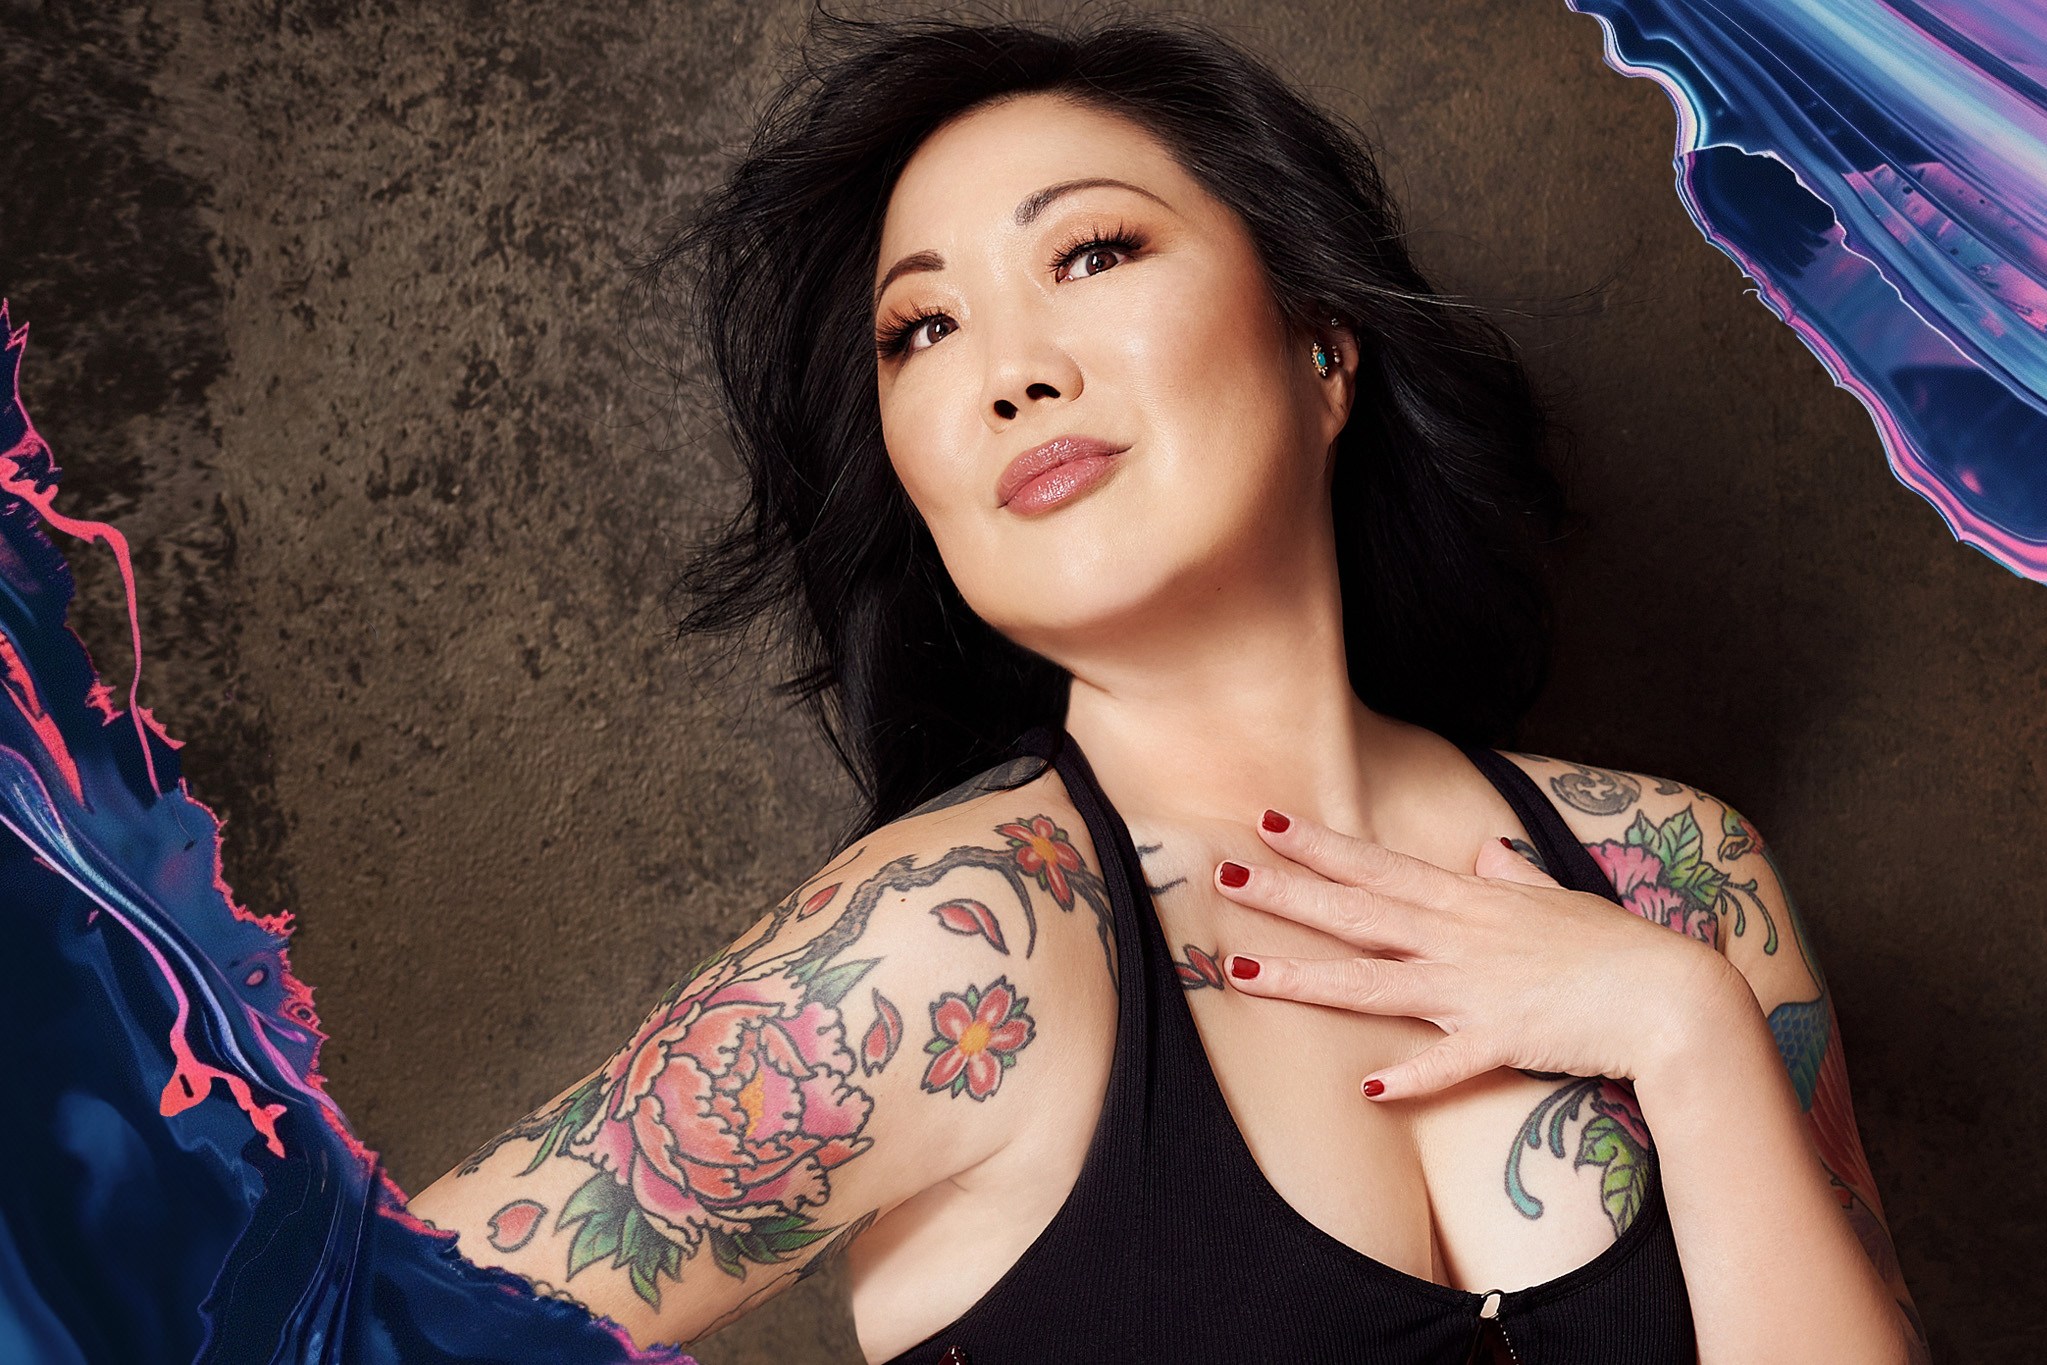 Margaret Cho poses in a black tank top, showing off the color tattoos on her arms.